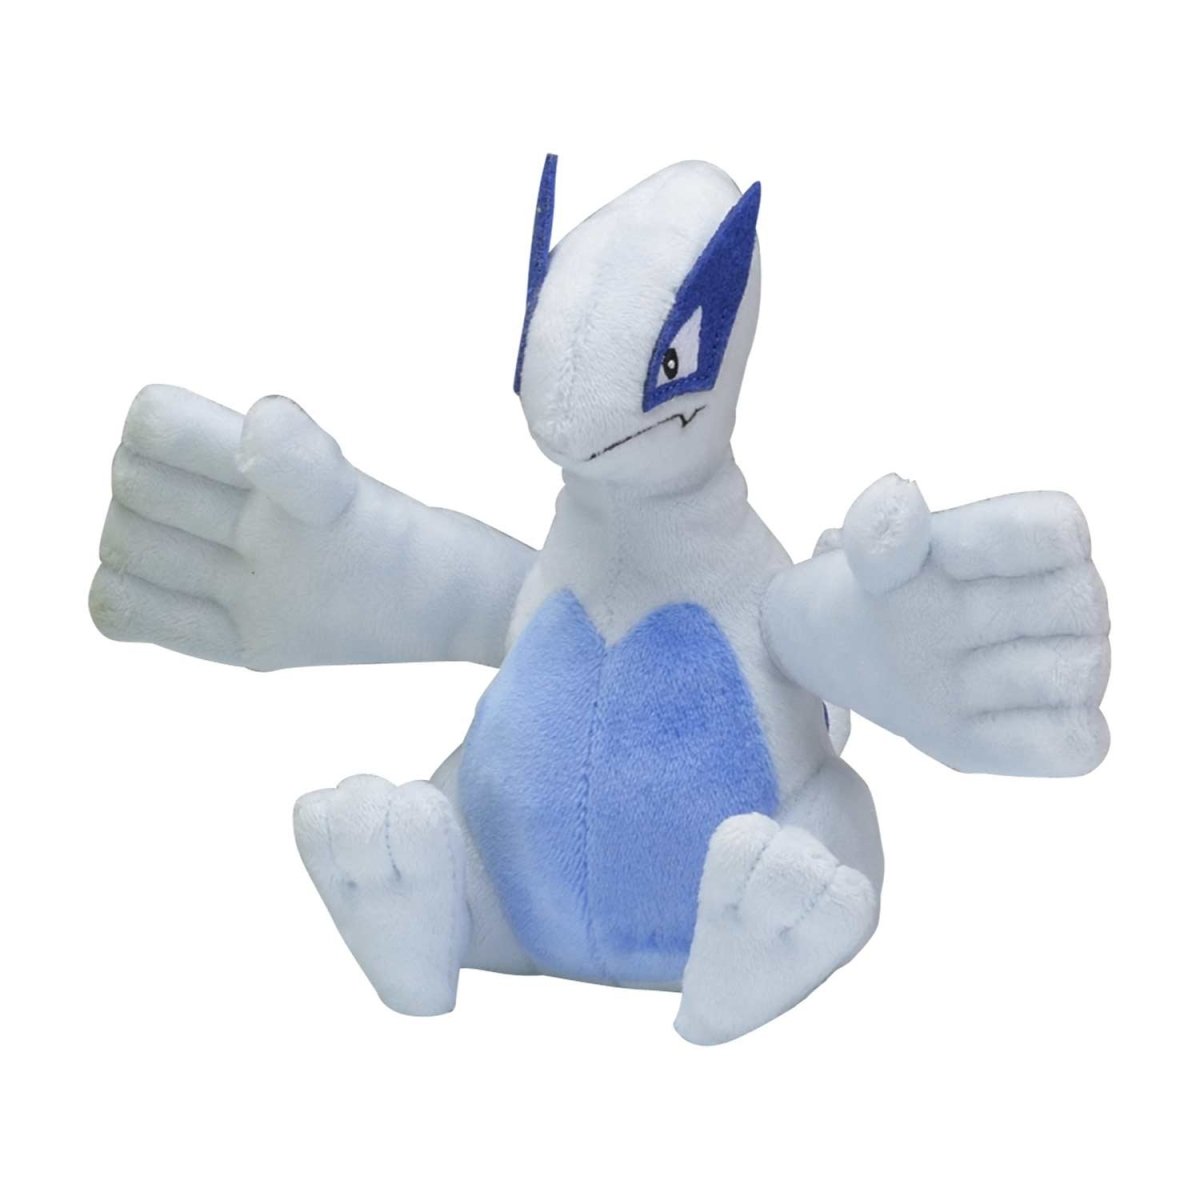 Pokemon Center Lugia And Ho-Oh Plushies Up For Pre-Order, More